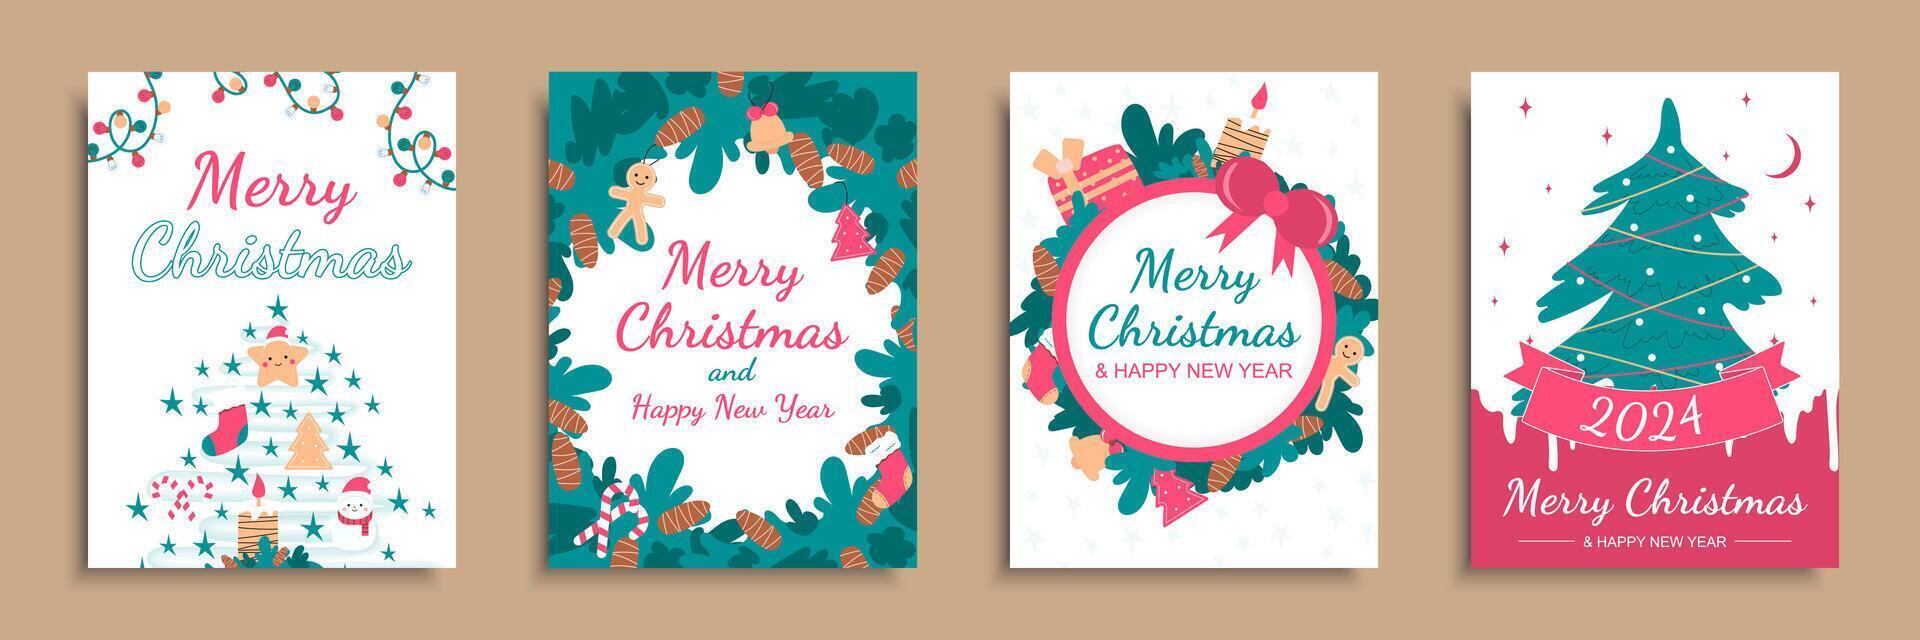 Merry Christmas 2024 cover brochure set in flat design. Poster templates with festive trees with toys, socks and cookies, garland lights, fir wreath with pine cones, other decors. Vector illustration.